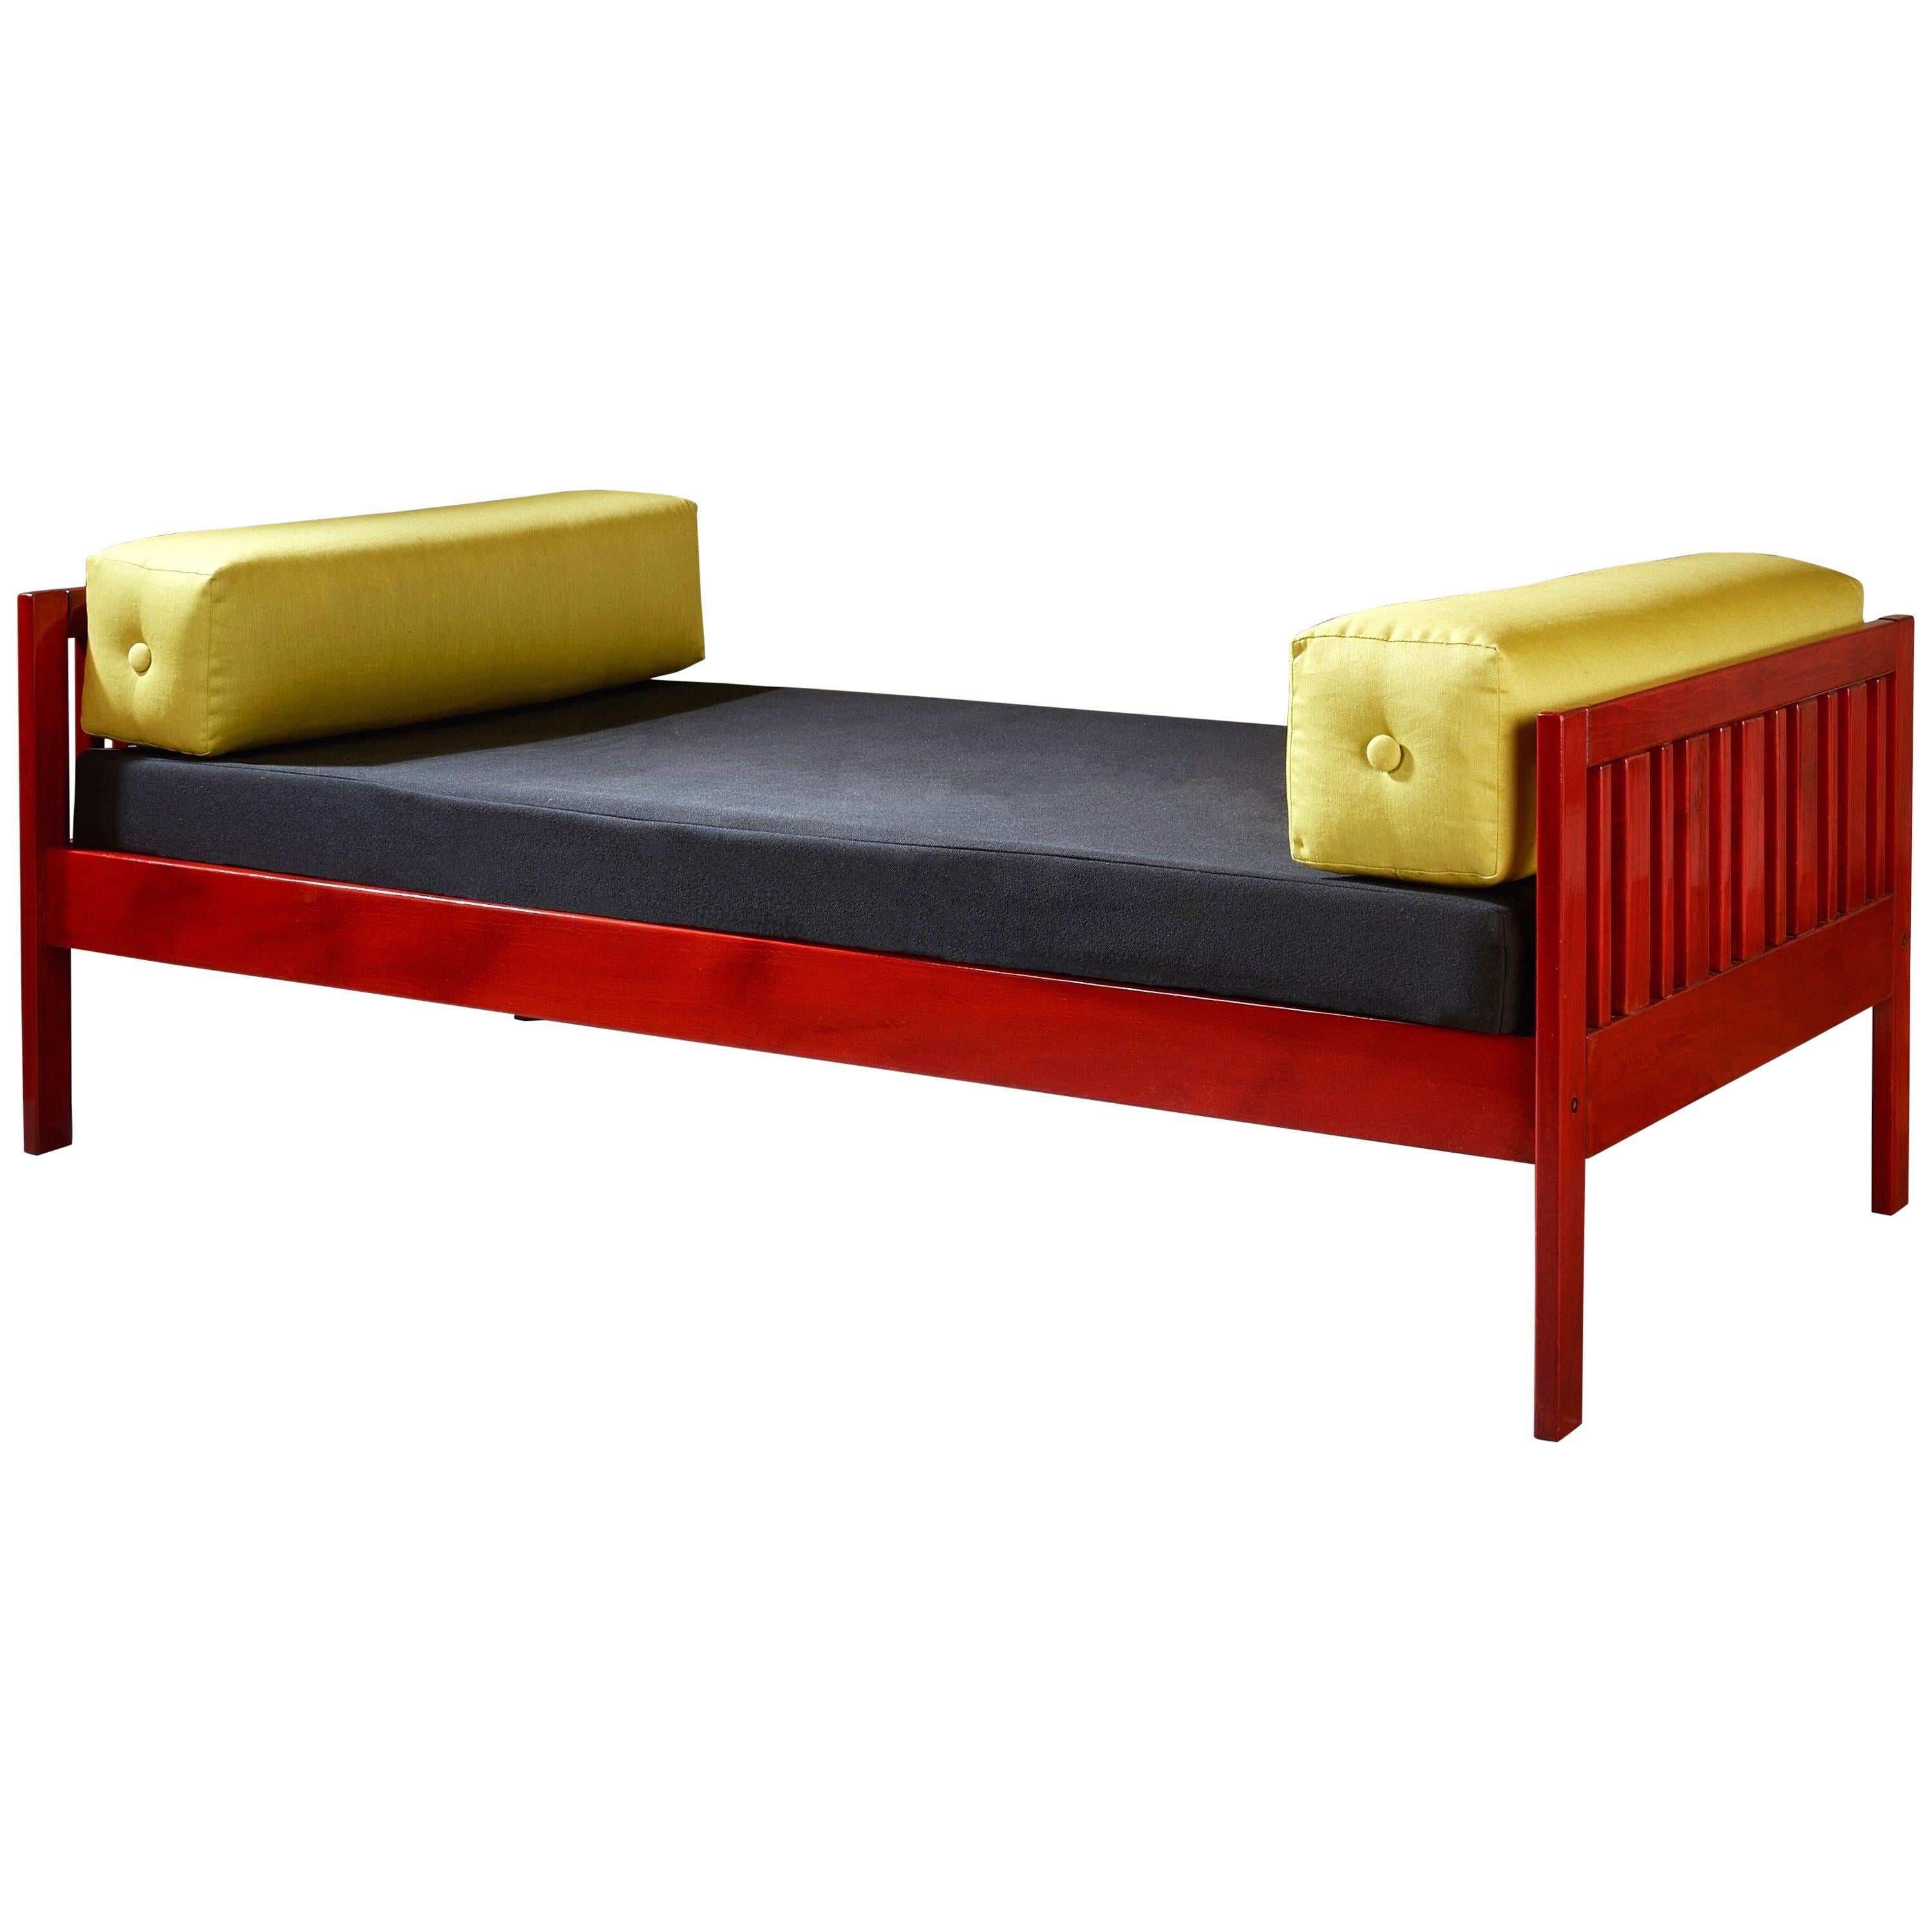 Ettore Sottsass Daybed, Red Lacquered Wood, Chartreuse Upholstery, Italy c. 1962 For Sale